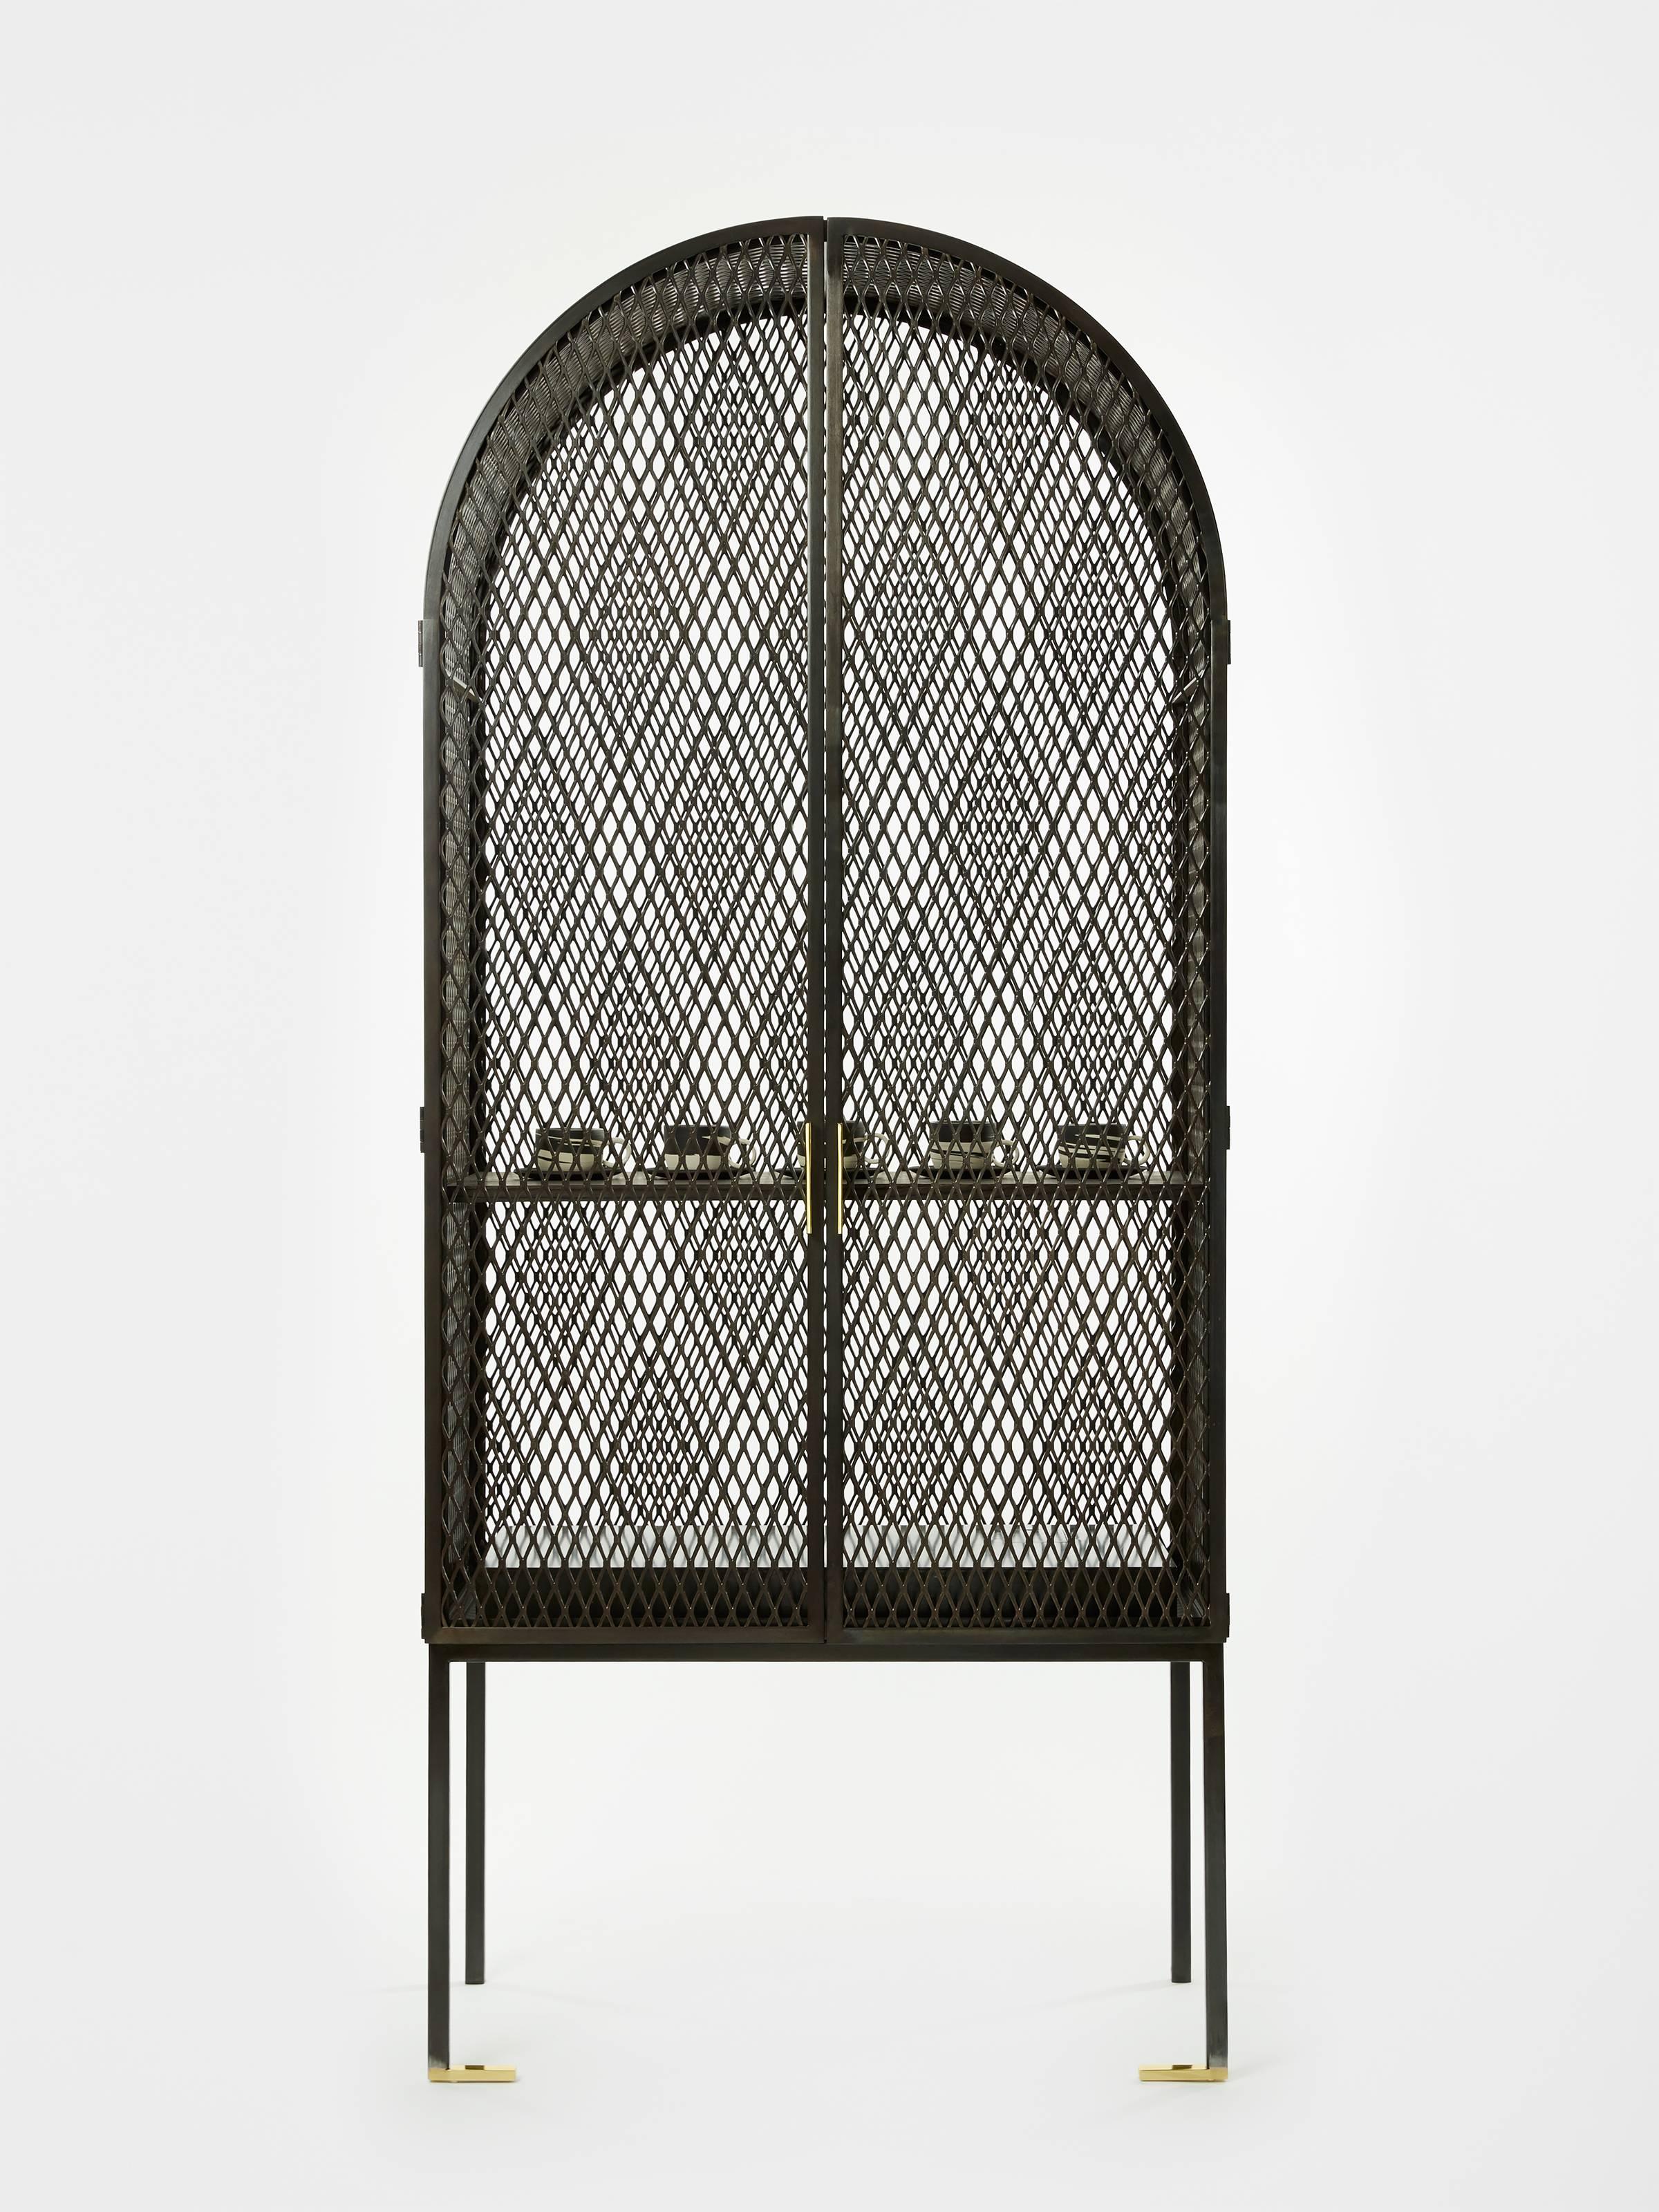 The Louise Cabinet is a study in simultaneity. It combines light with shadow, angles with arches, and blackened metal with glistening brass. 

Inspired by Louise Bourgeois’ ‘Cell’ sculptures, which she describes as dealing “with the pleasure of